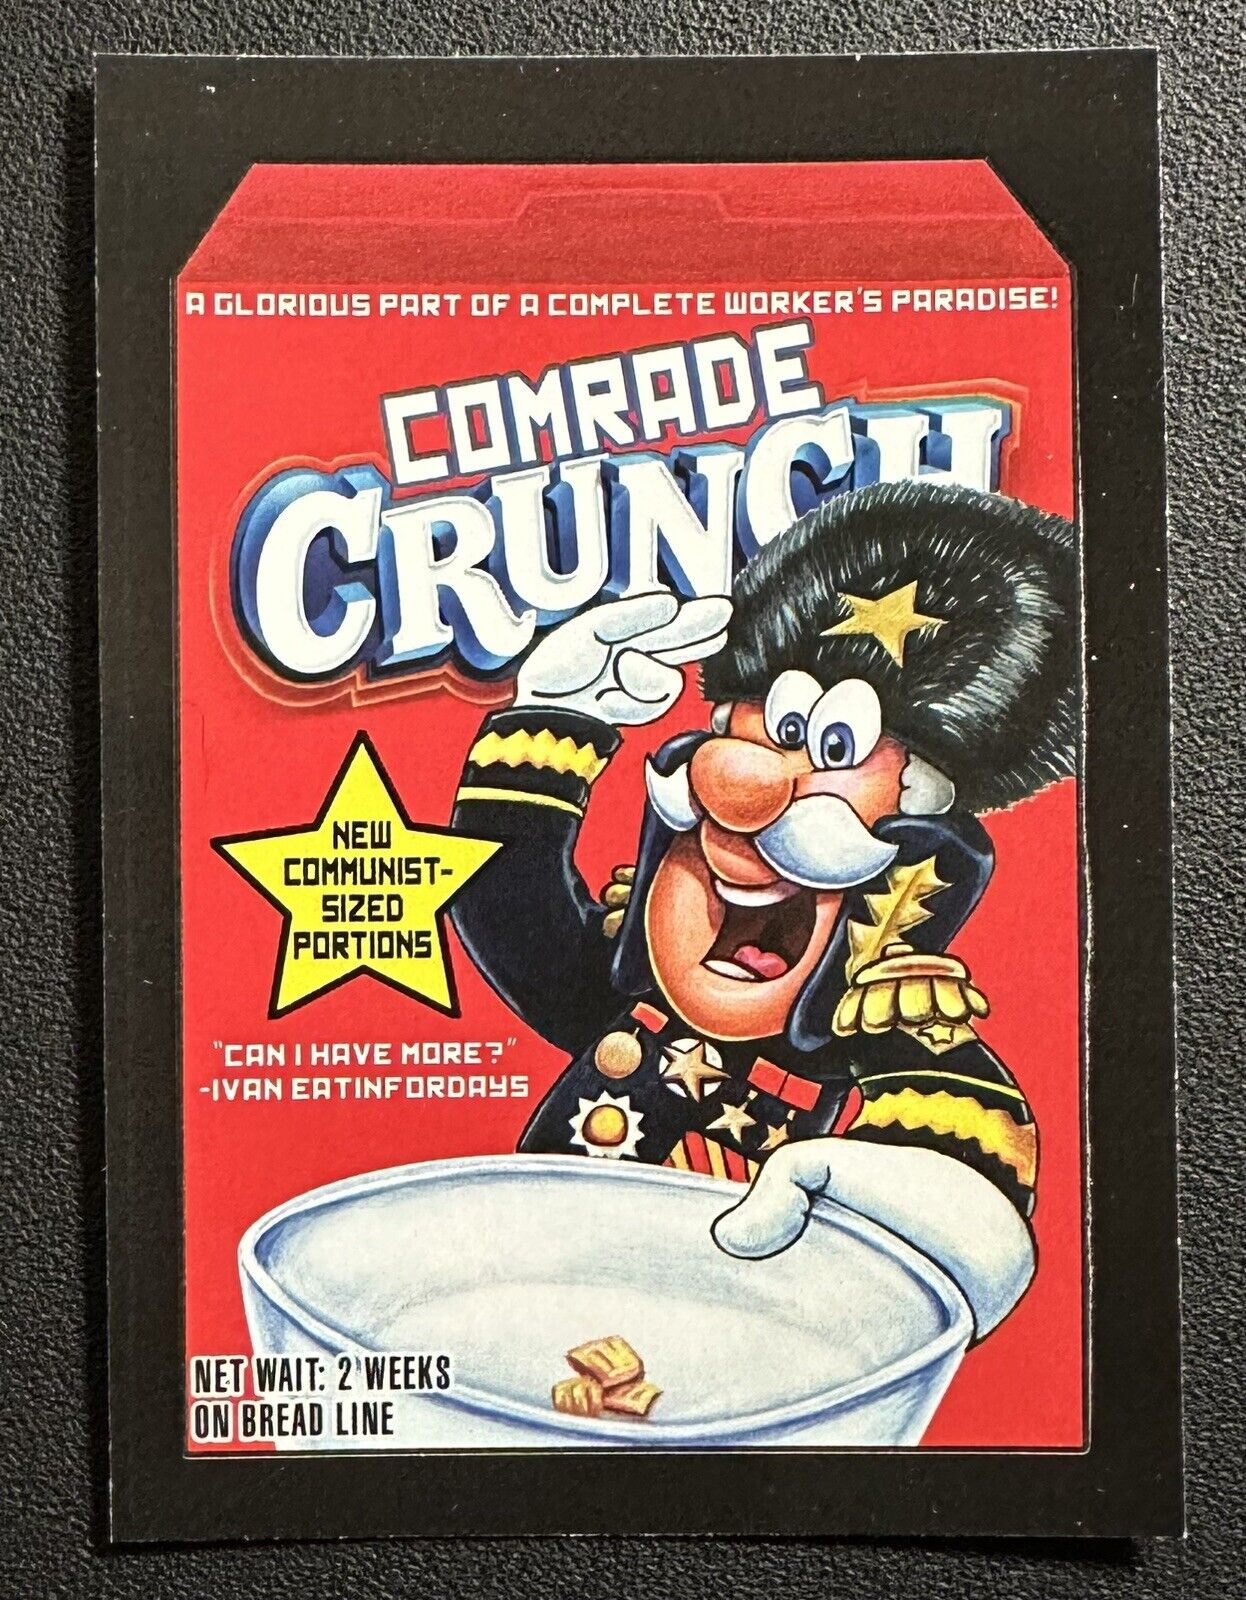 #1 COMRADE CRUNCH 2017 Wacky Packages 50th Anniversary Crazy Cereal Stickers